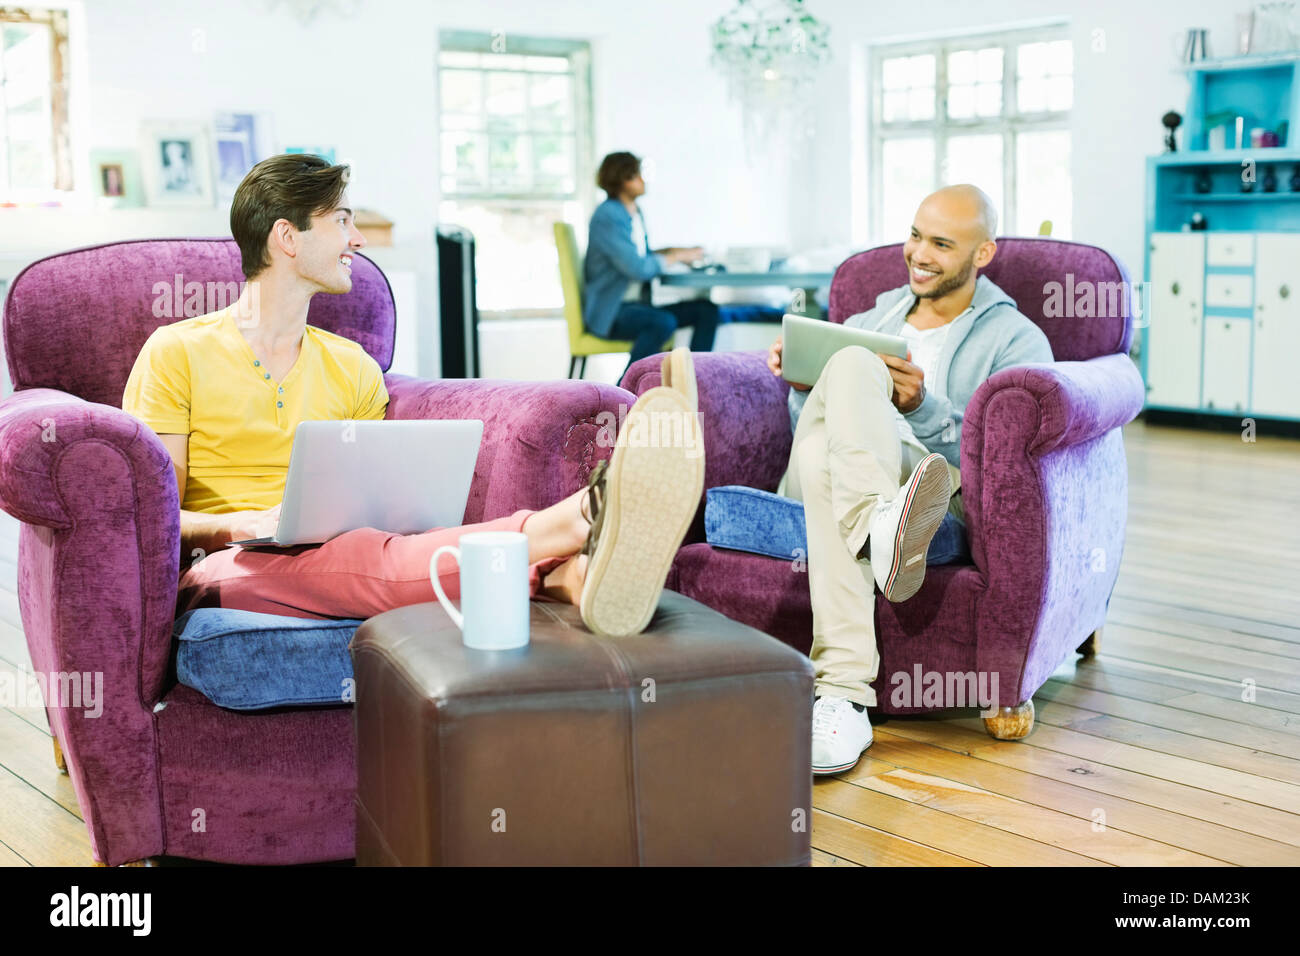 Men relaxing together in living room Stock Photo